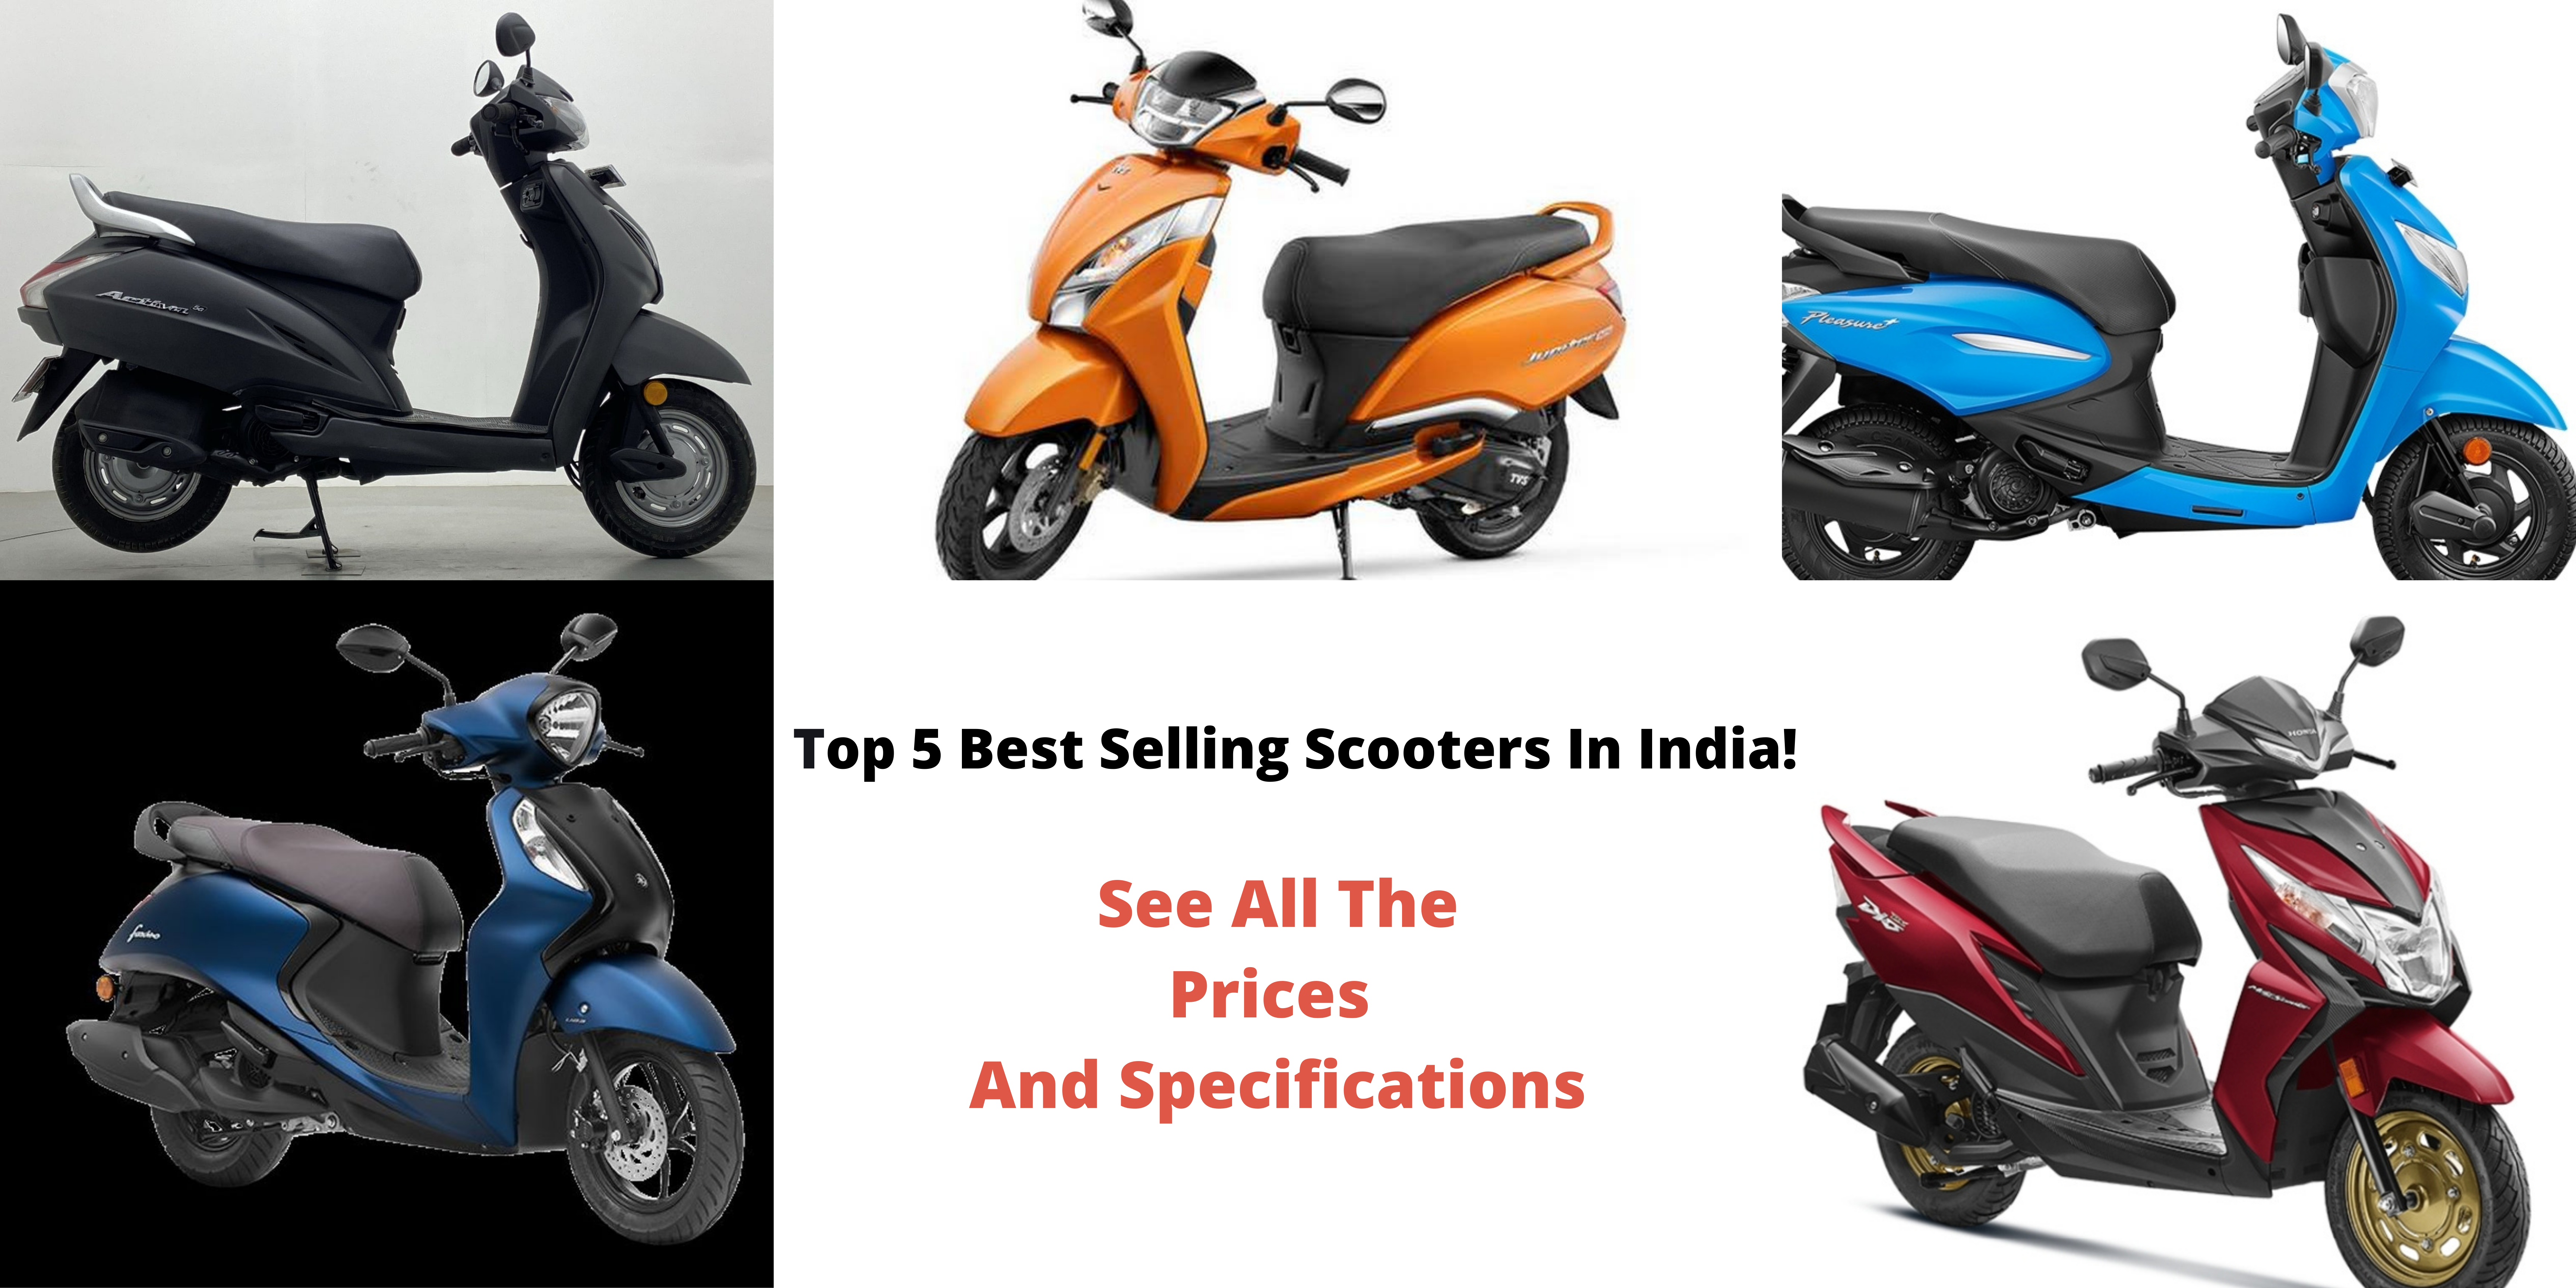 Top 5 Best Selling Scooters 